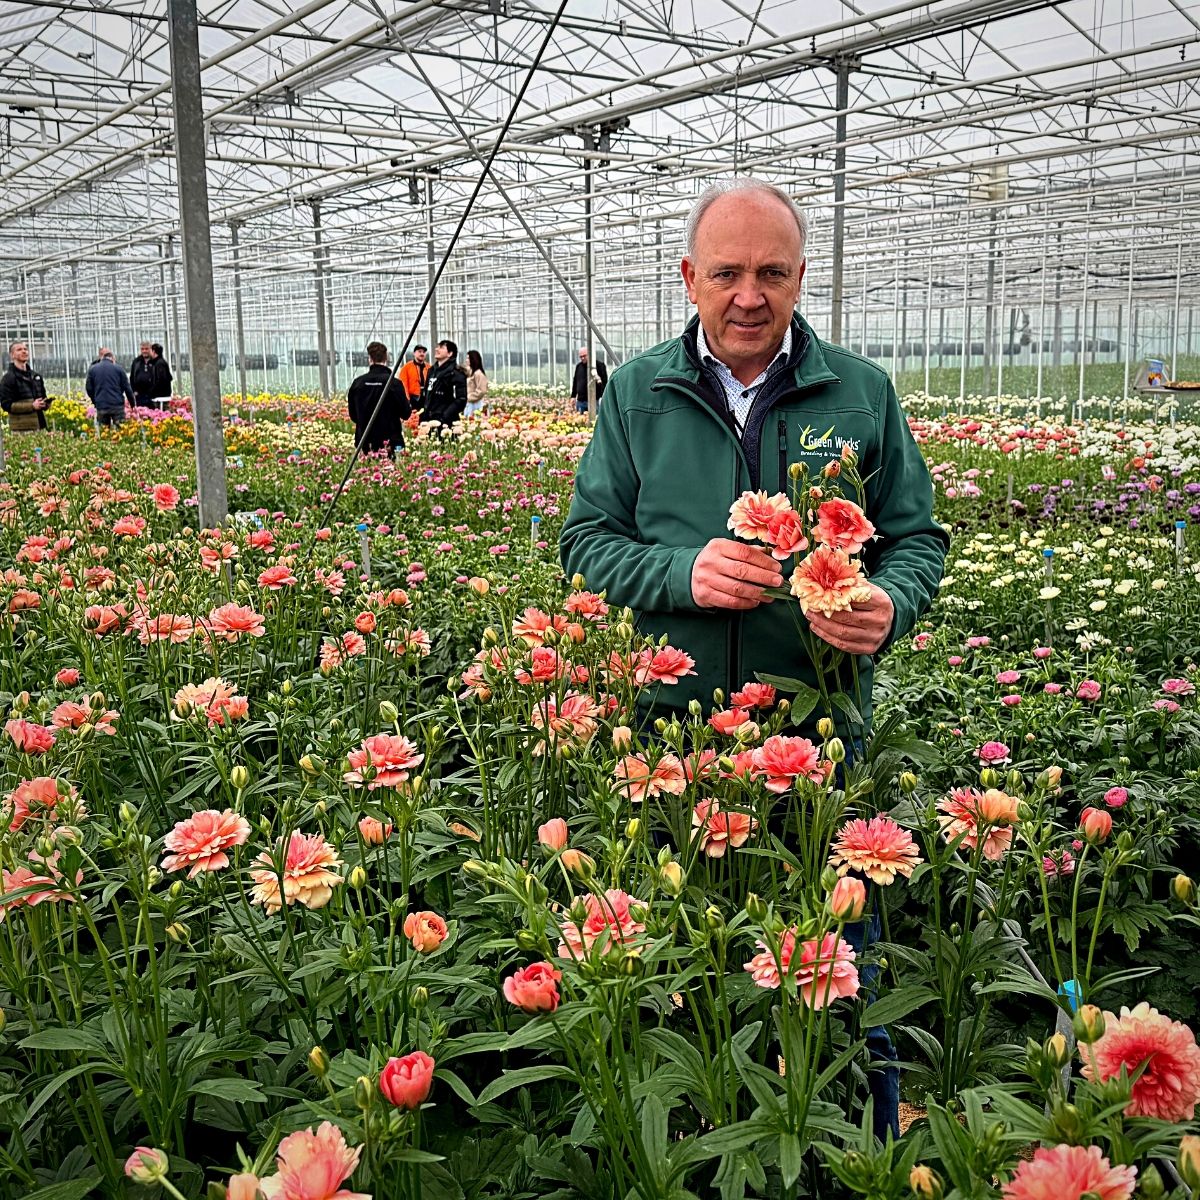 Ranunculus Butterfly™ series from grower Monarch Flowers for Coloríginz